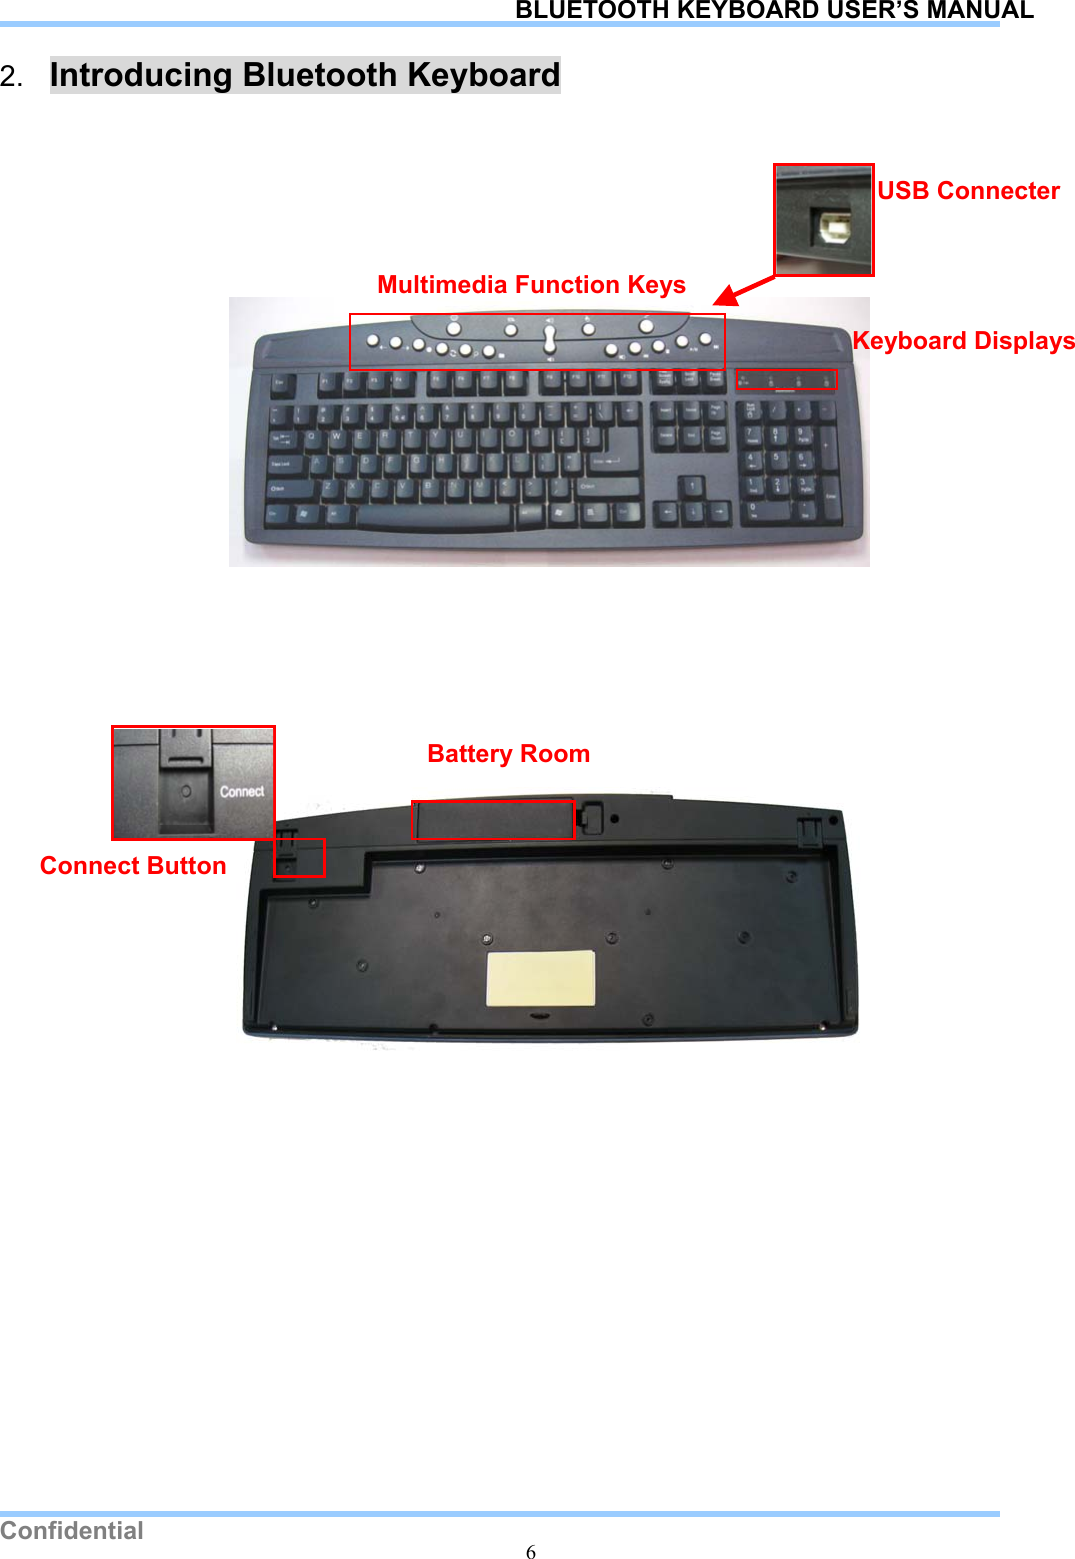   Confidential   6 BLUETOOTH KEYBOARD USER’S MANUAL2.  Introducing Bluetooth Keyboard             USB Connecter Multimedia Function KeysKeyboard Displays Connect Button Battery Room 